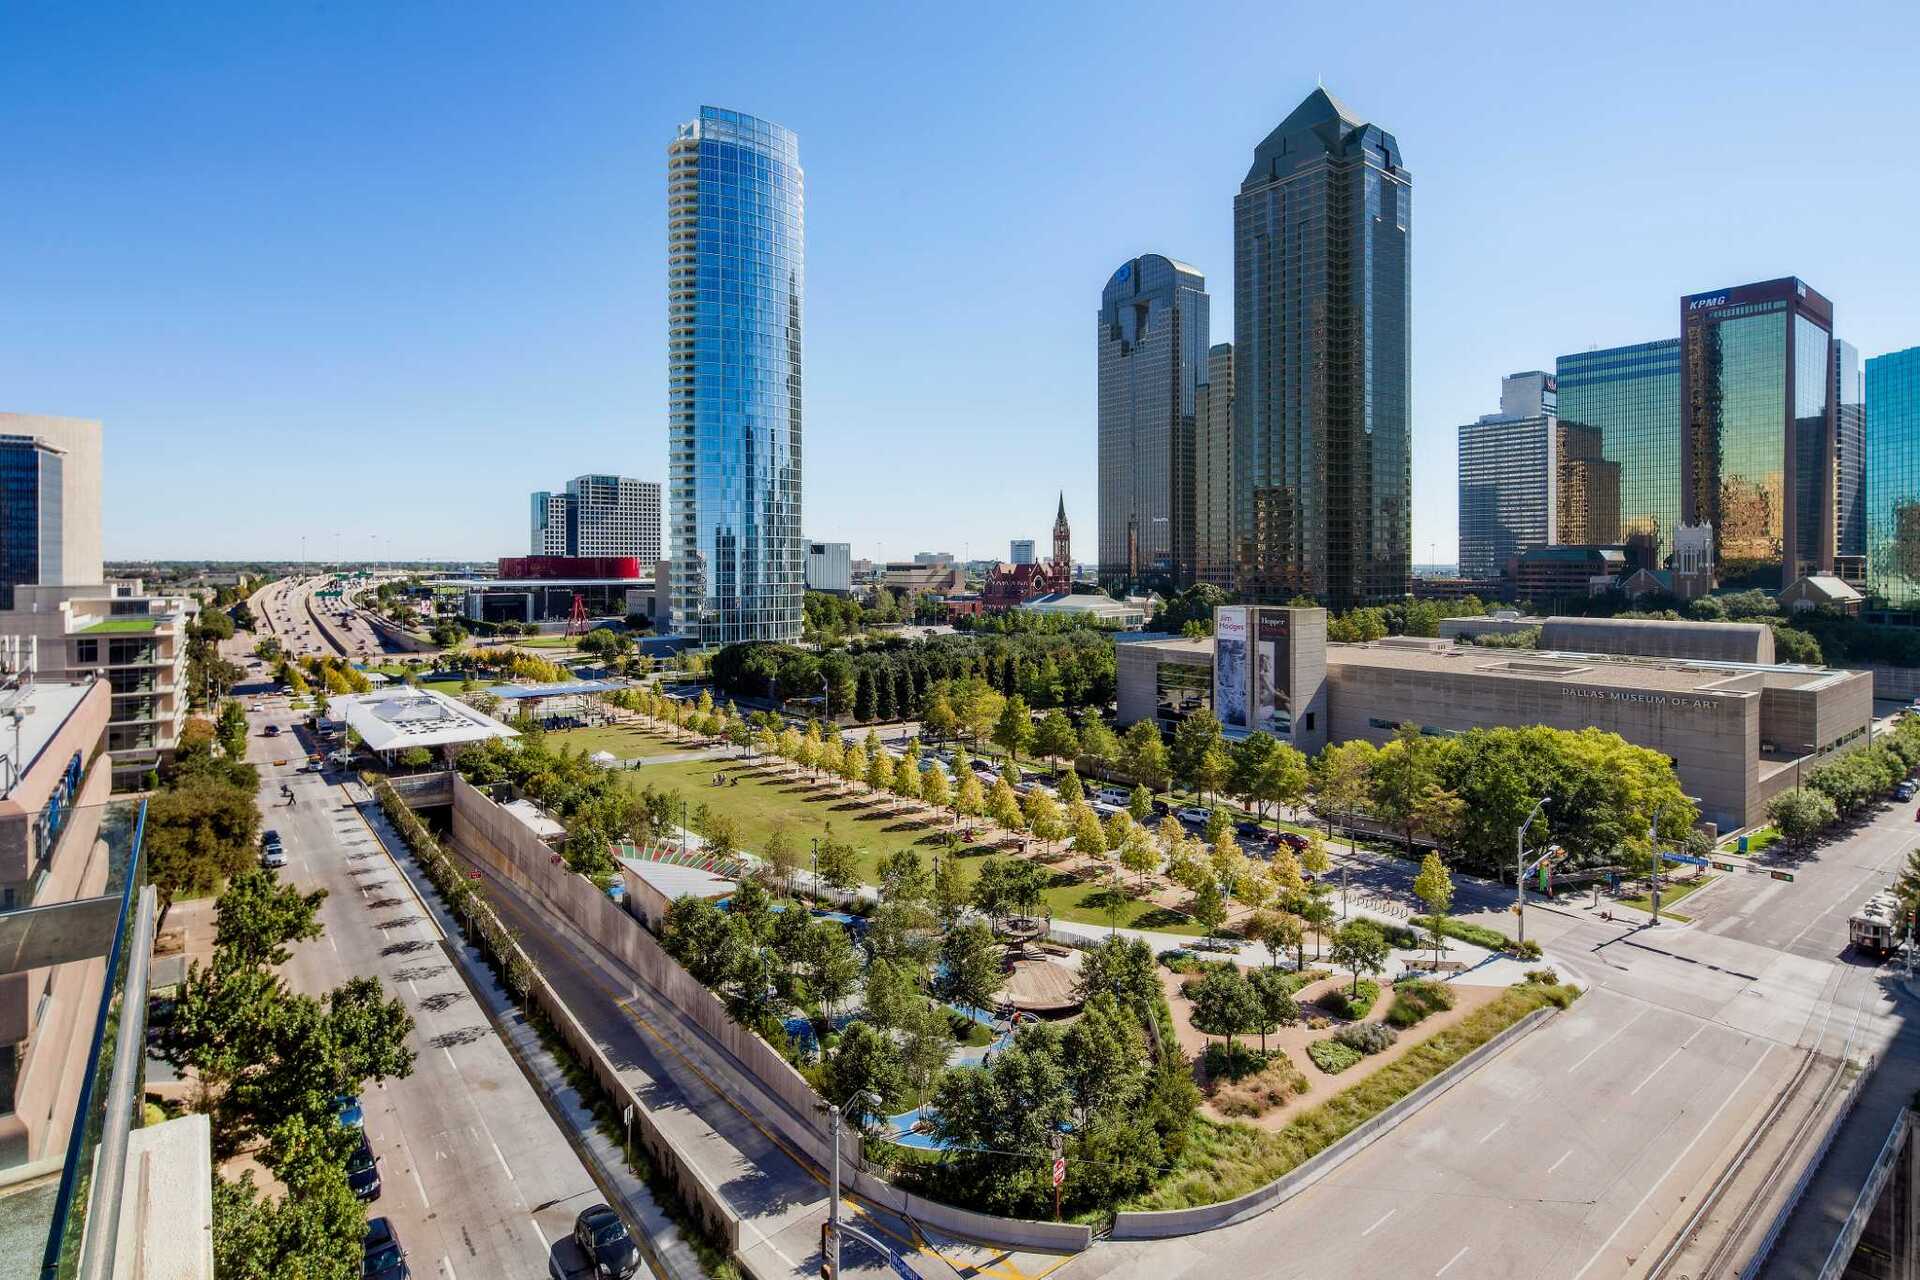 Bridging The Gap: How A Recessed Freeway In Dallas Transformed Into An Urban Green Space